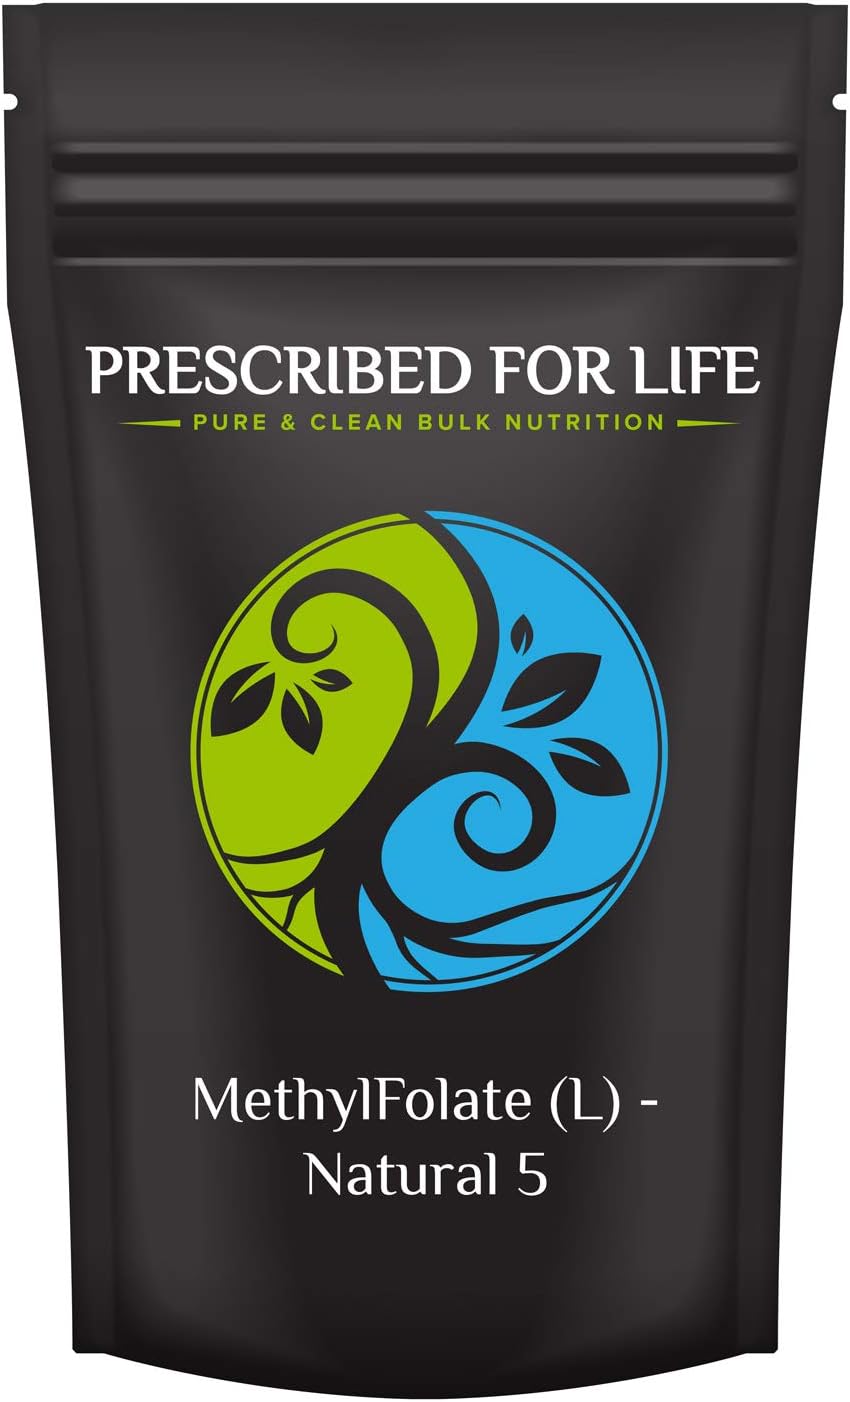 Prescribed For Life Methyl Folate Powder | Bioavailable Folic Acid to Support Brain Health | Pure Powdered Vitamin B9 Folate Supplement for Women  Men (2 oz / 28 g)